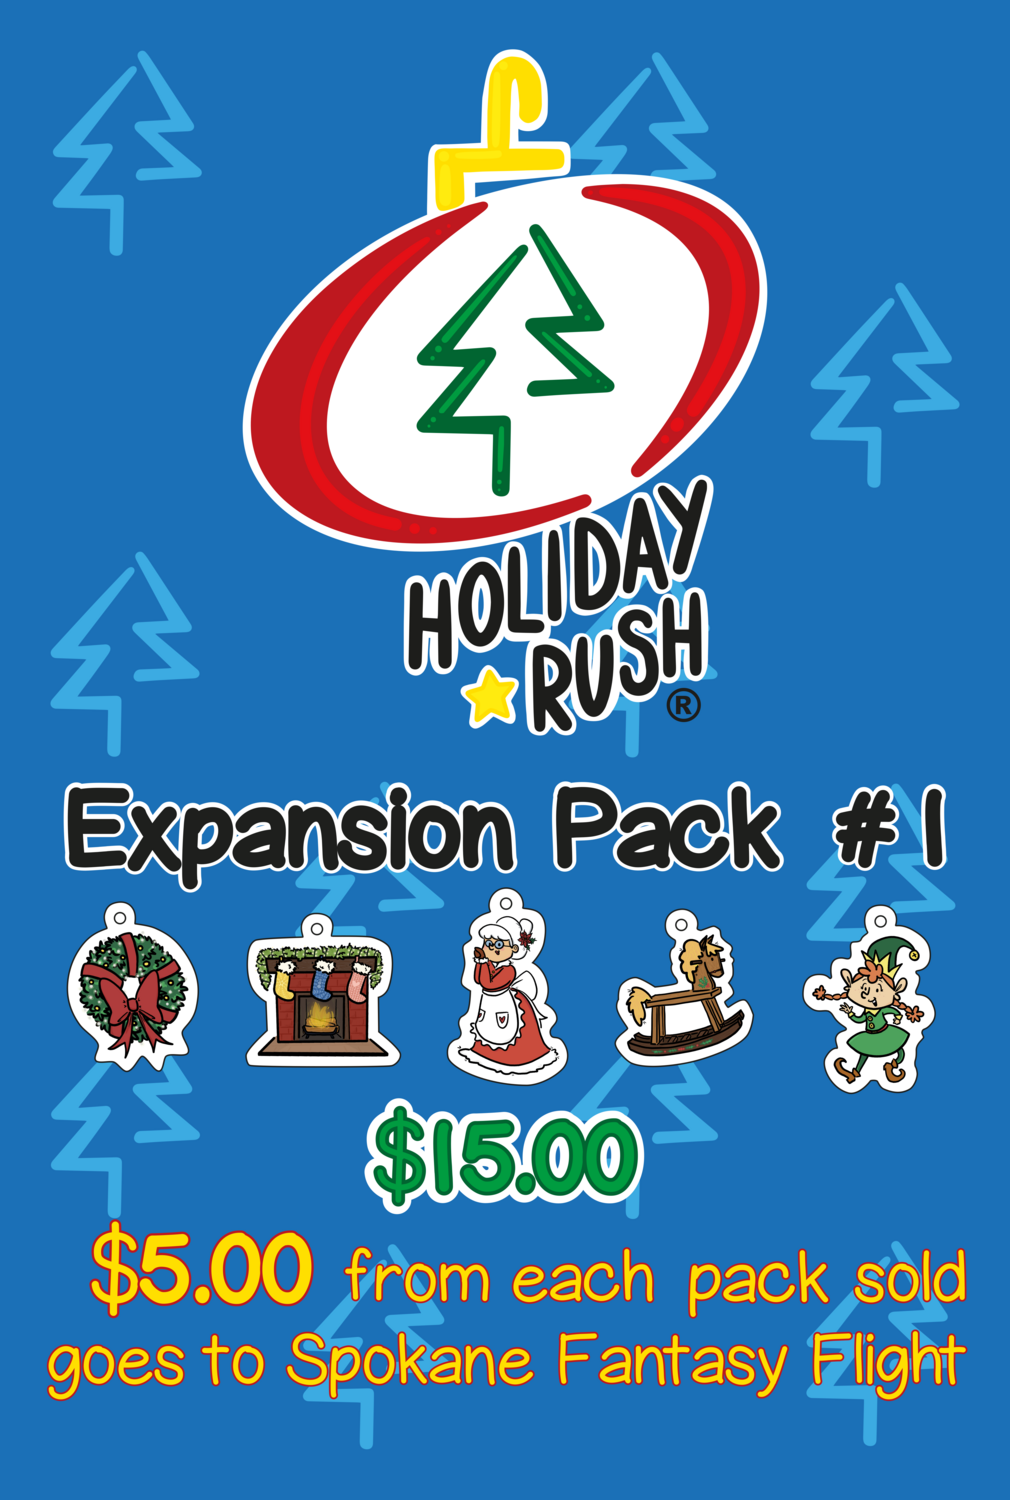 Holiday Rush - Expansion Pack #1